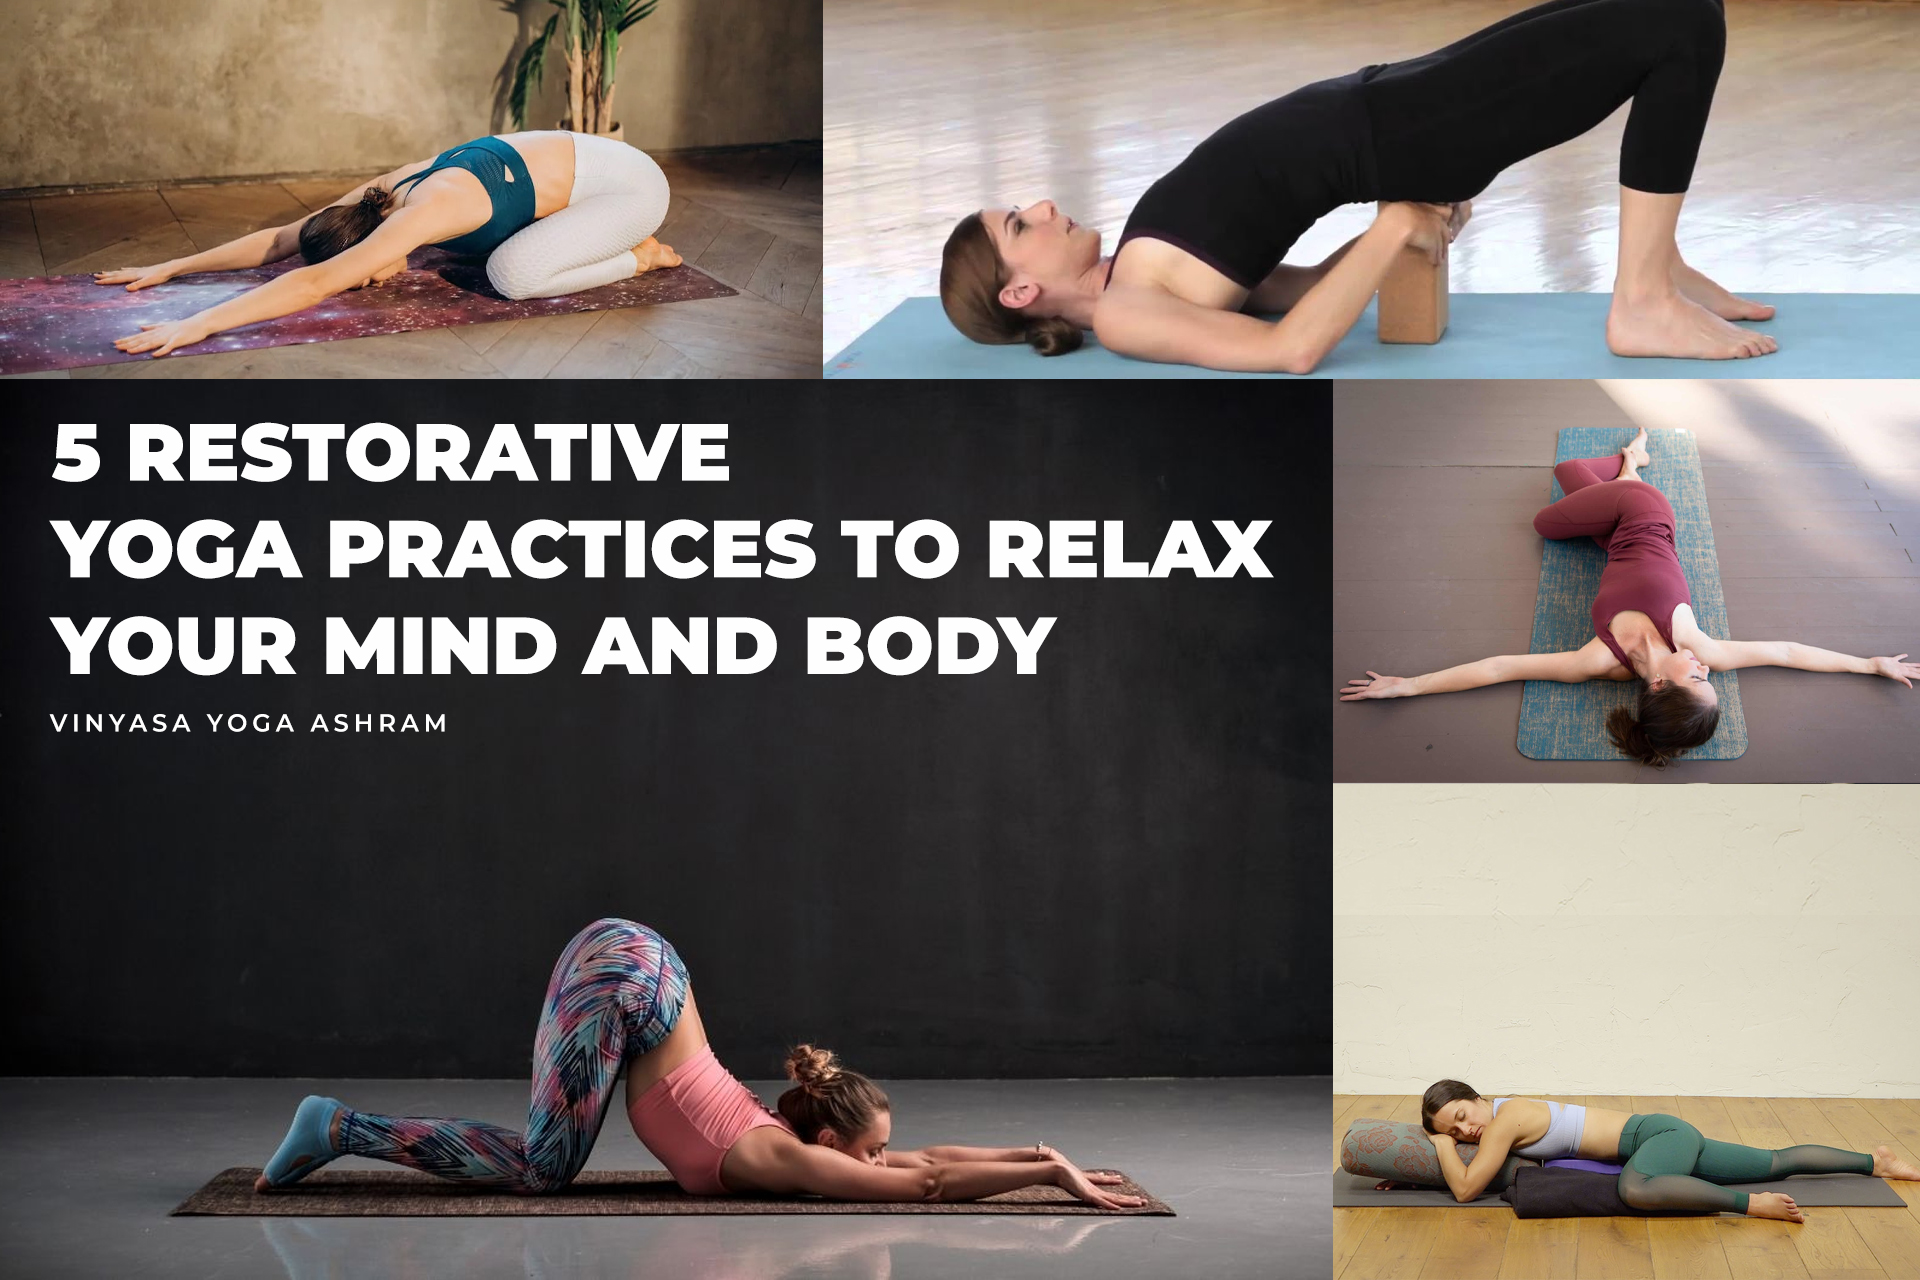 5 Restorative Yoga Practices to relax your mind and body - Learn